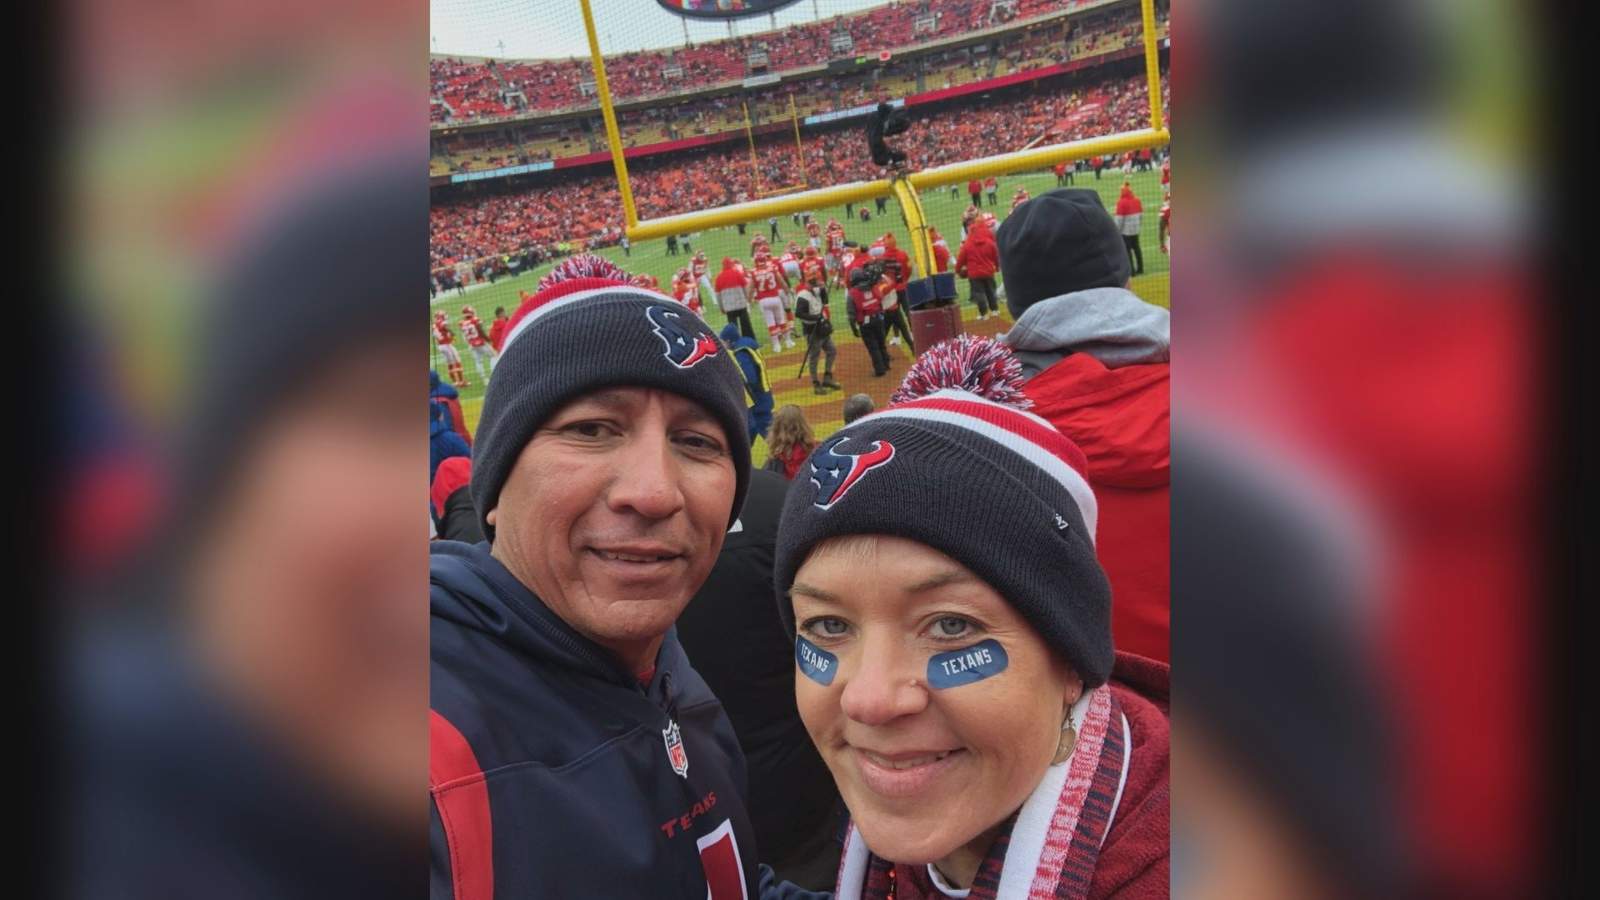 'Like a little kid waiting for Christmas: Texans superfan excited for game opener in Kansas City